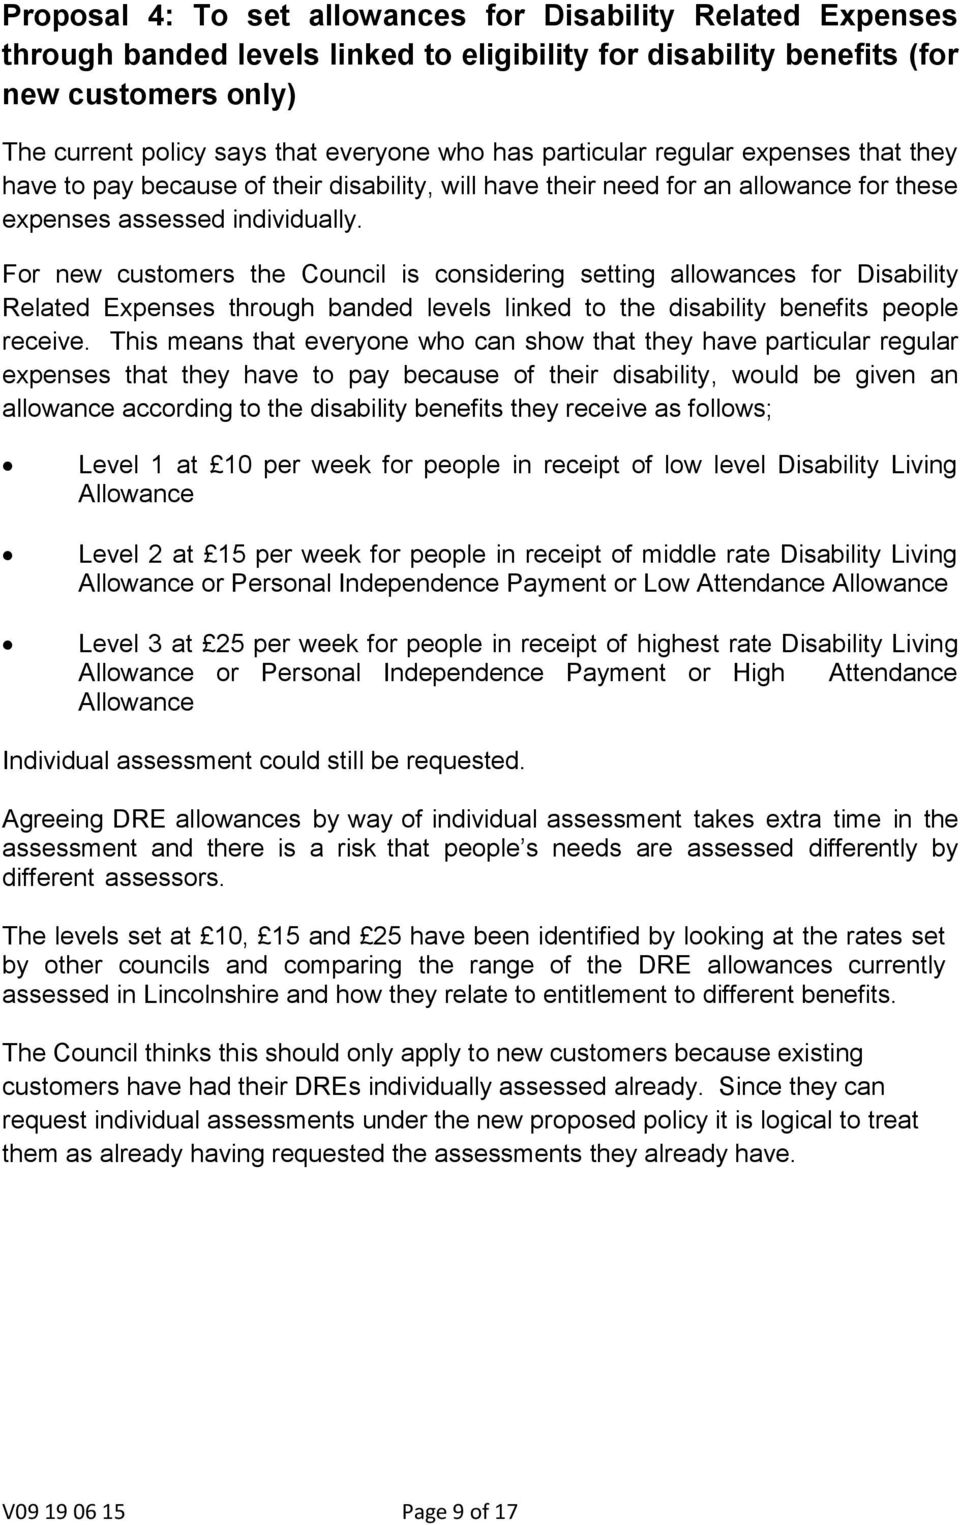 For new customers the Council is considering setting allowances for Disability Related Expenses through banded levels linked to the disability benefits people receive.